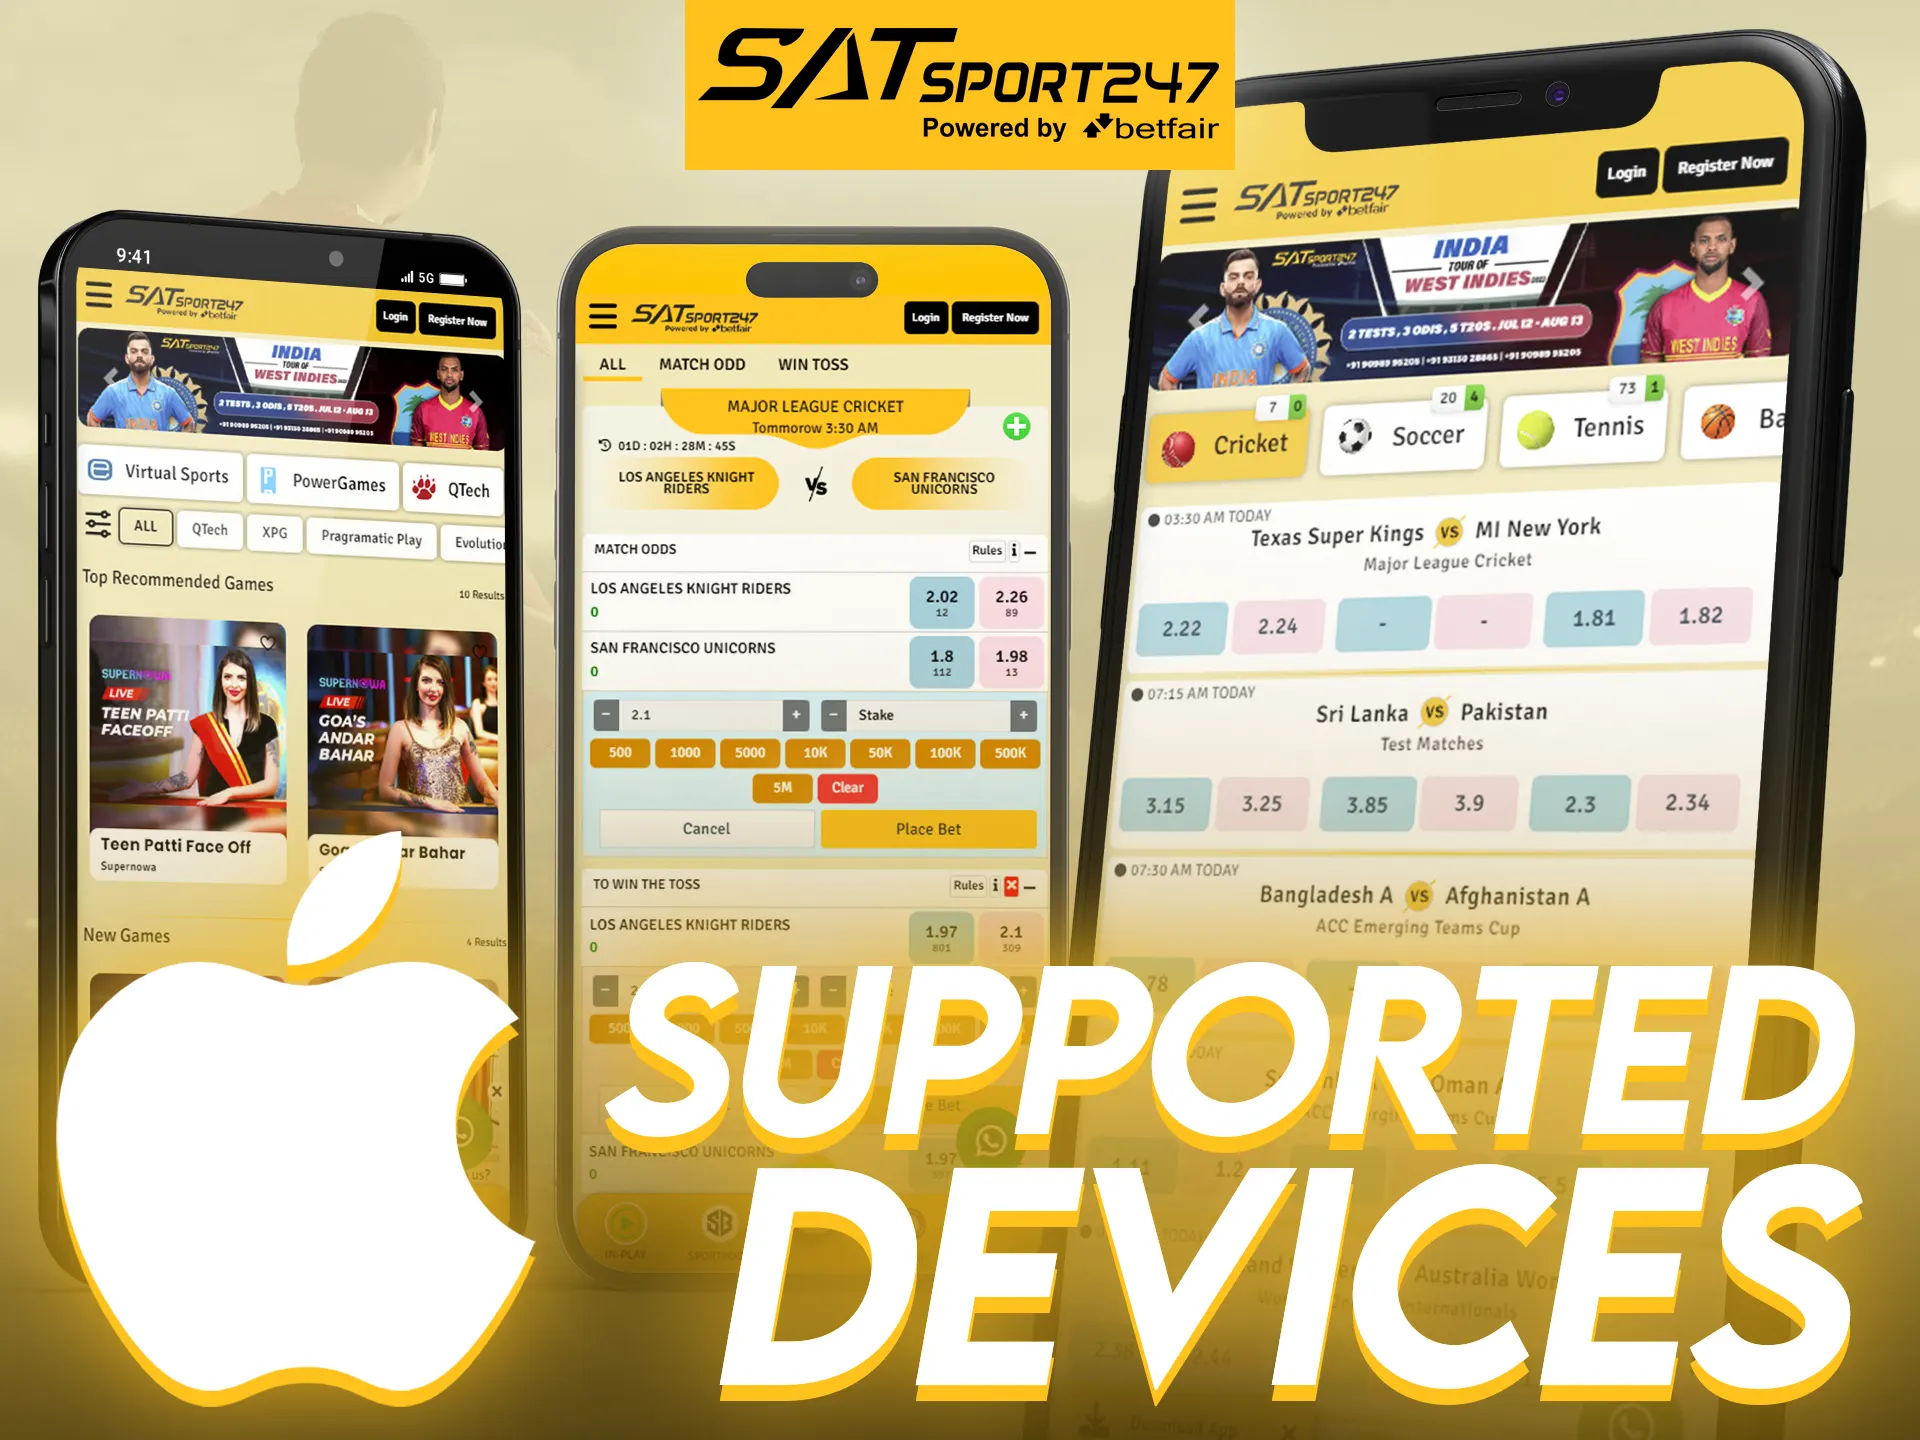 The Satsport247 app can be installed on a variety of devices with the iOS system.